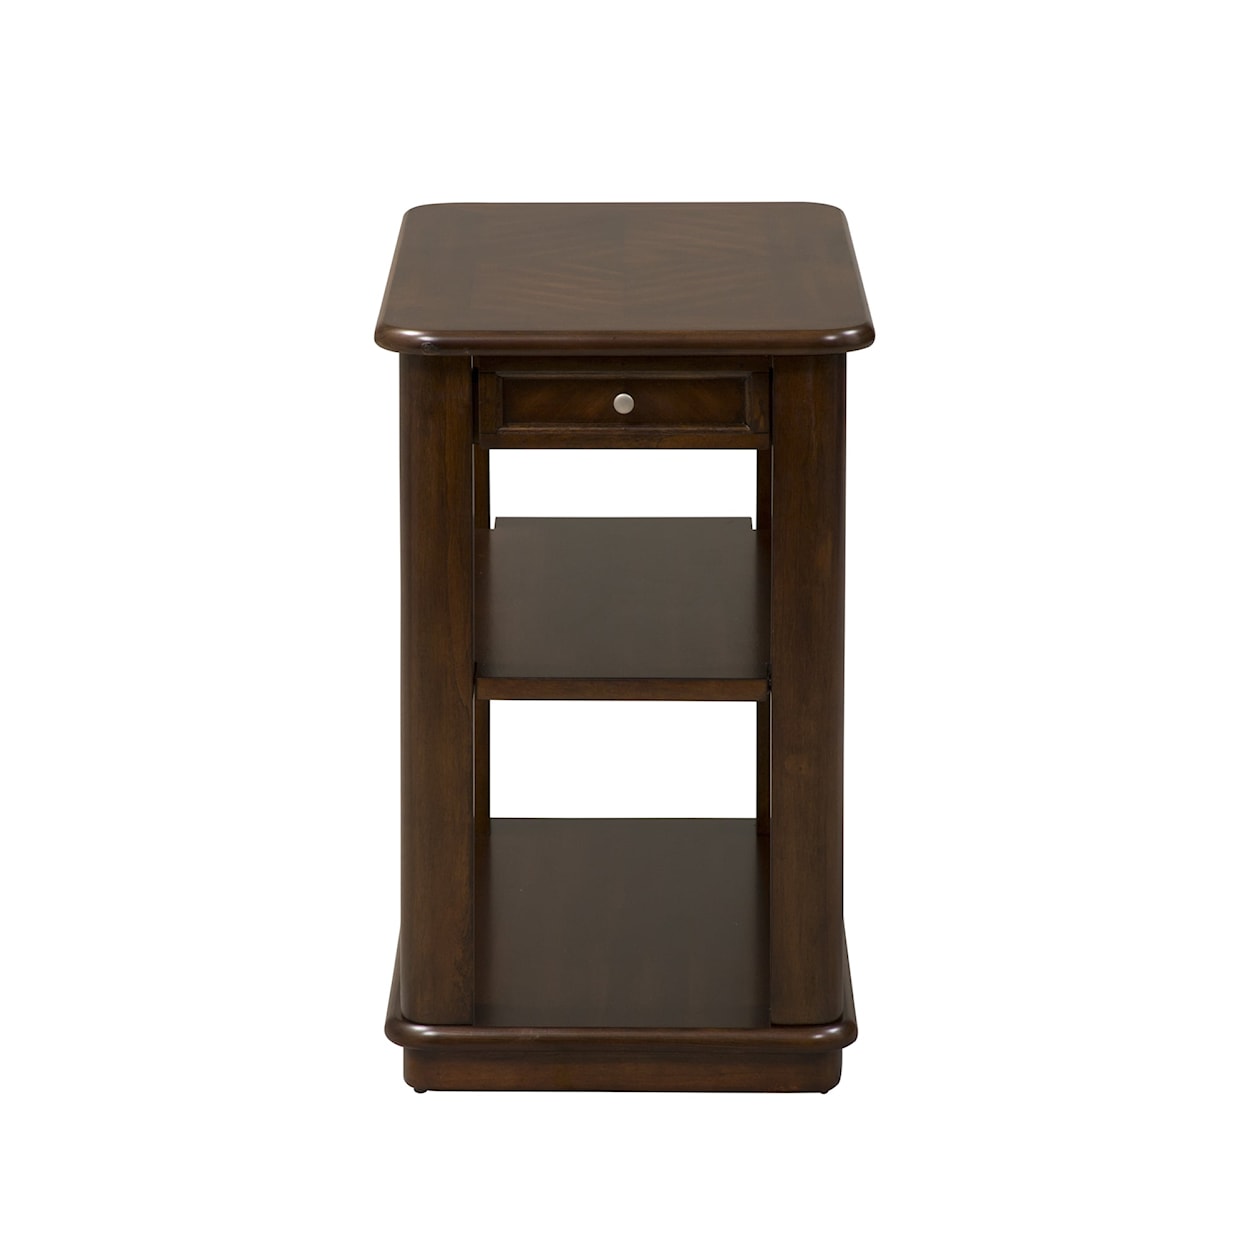 Liberty Furniture Wallace Chairside Table